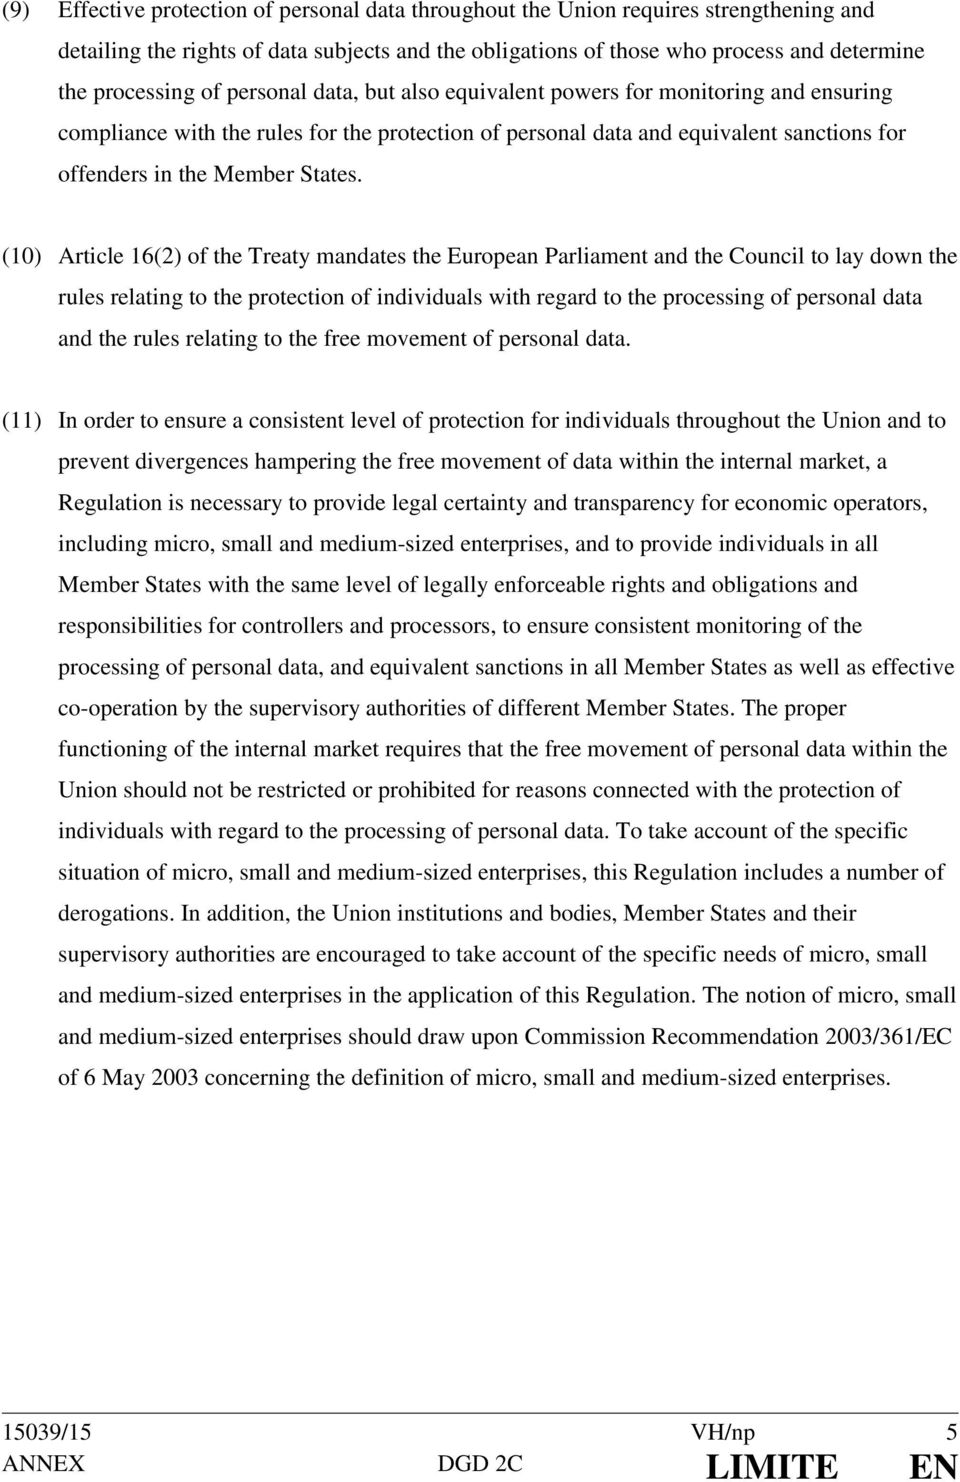 (10) Article 16(2) of the Treaty mandates the European Parliament and the Council to lay down the rules relating to the protection of individuals with regard to the processing of personal data and